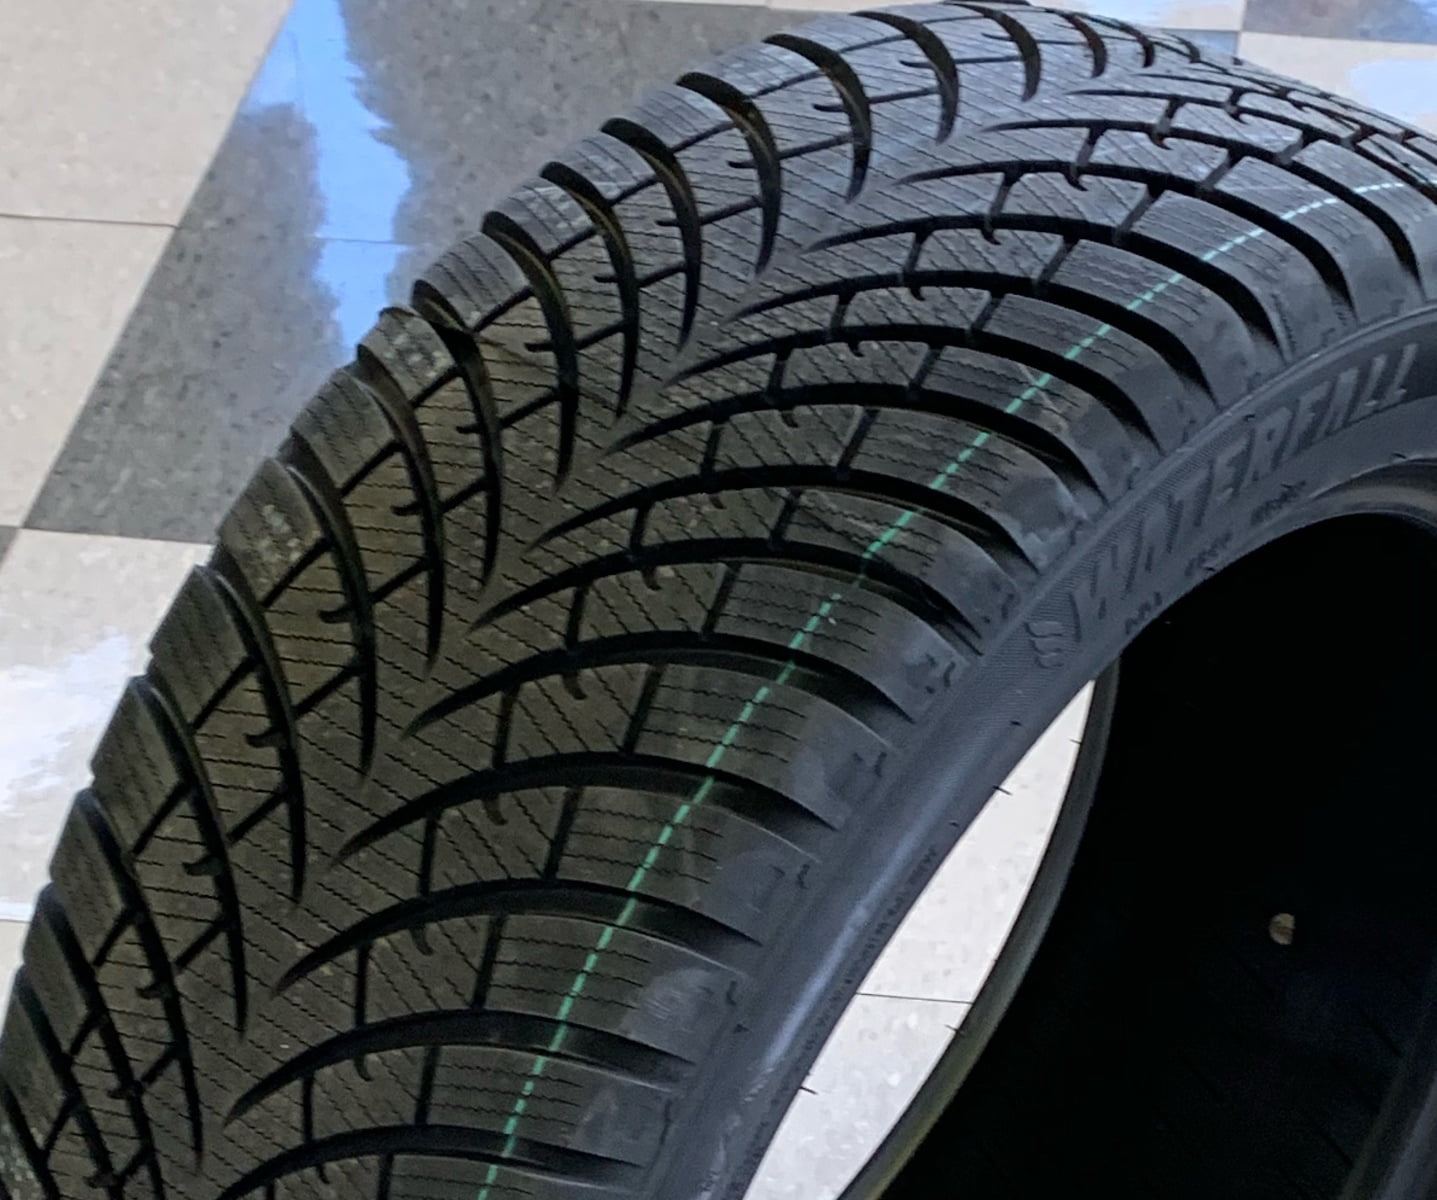 215/55R17 94V Waterfall Snow Hill 3 Studless Winter Tire